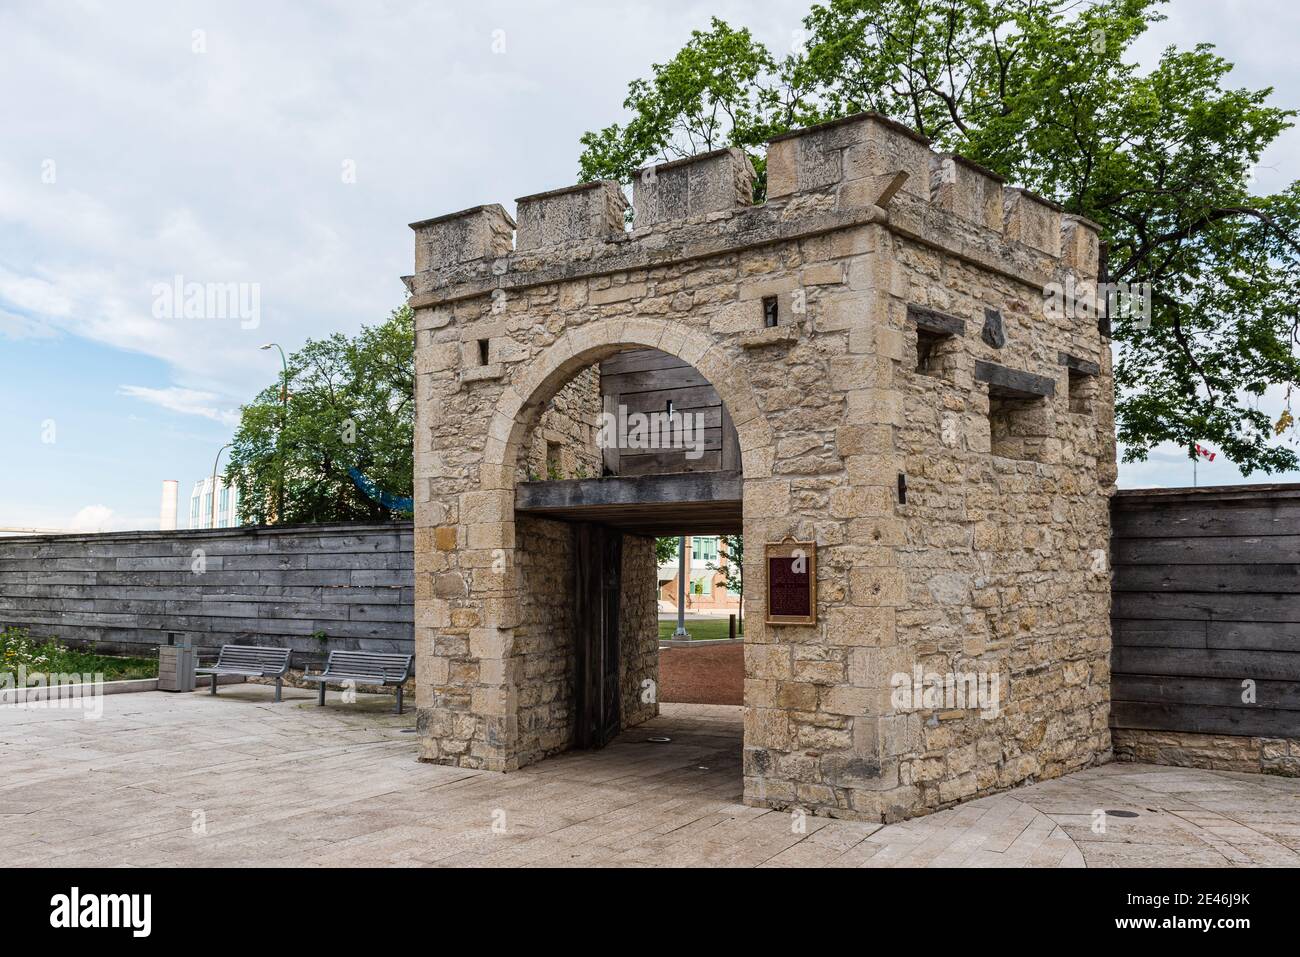 The Gate of the Historic Fort Garry, established by the Hudson Bay Company, in the actual Upper Fort Garry Park in the city of Winnipeg, Manitoba. Stock Photo